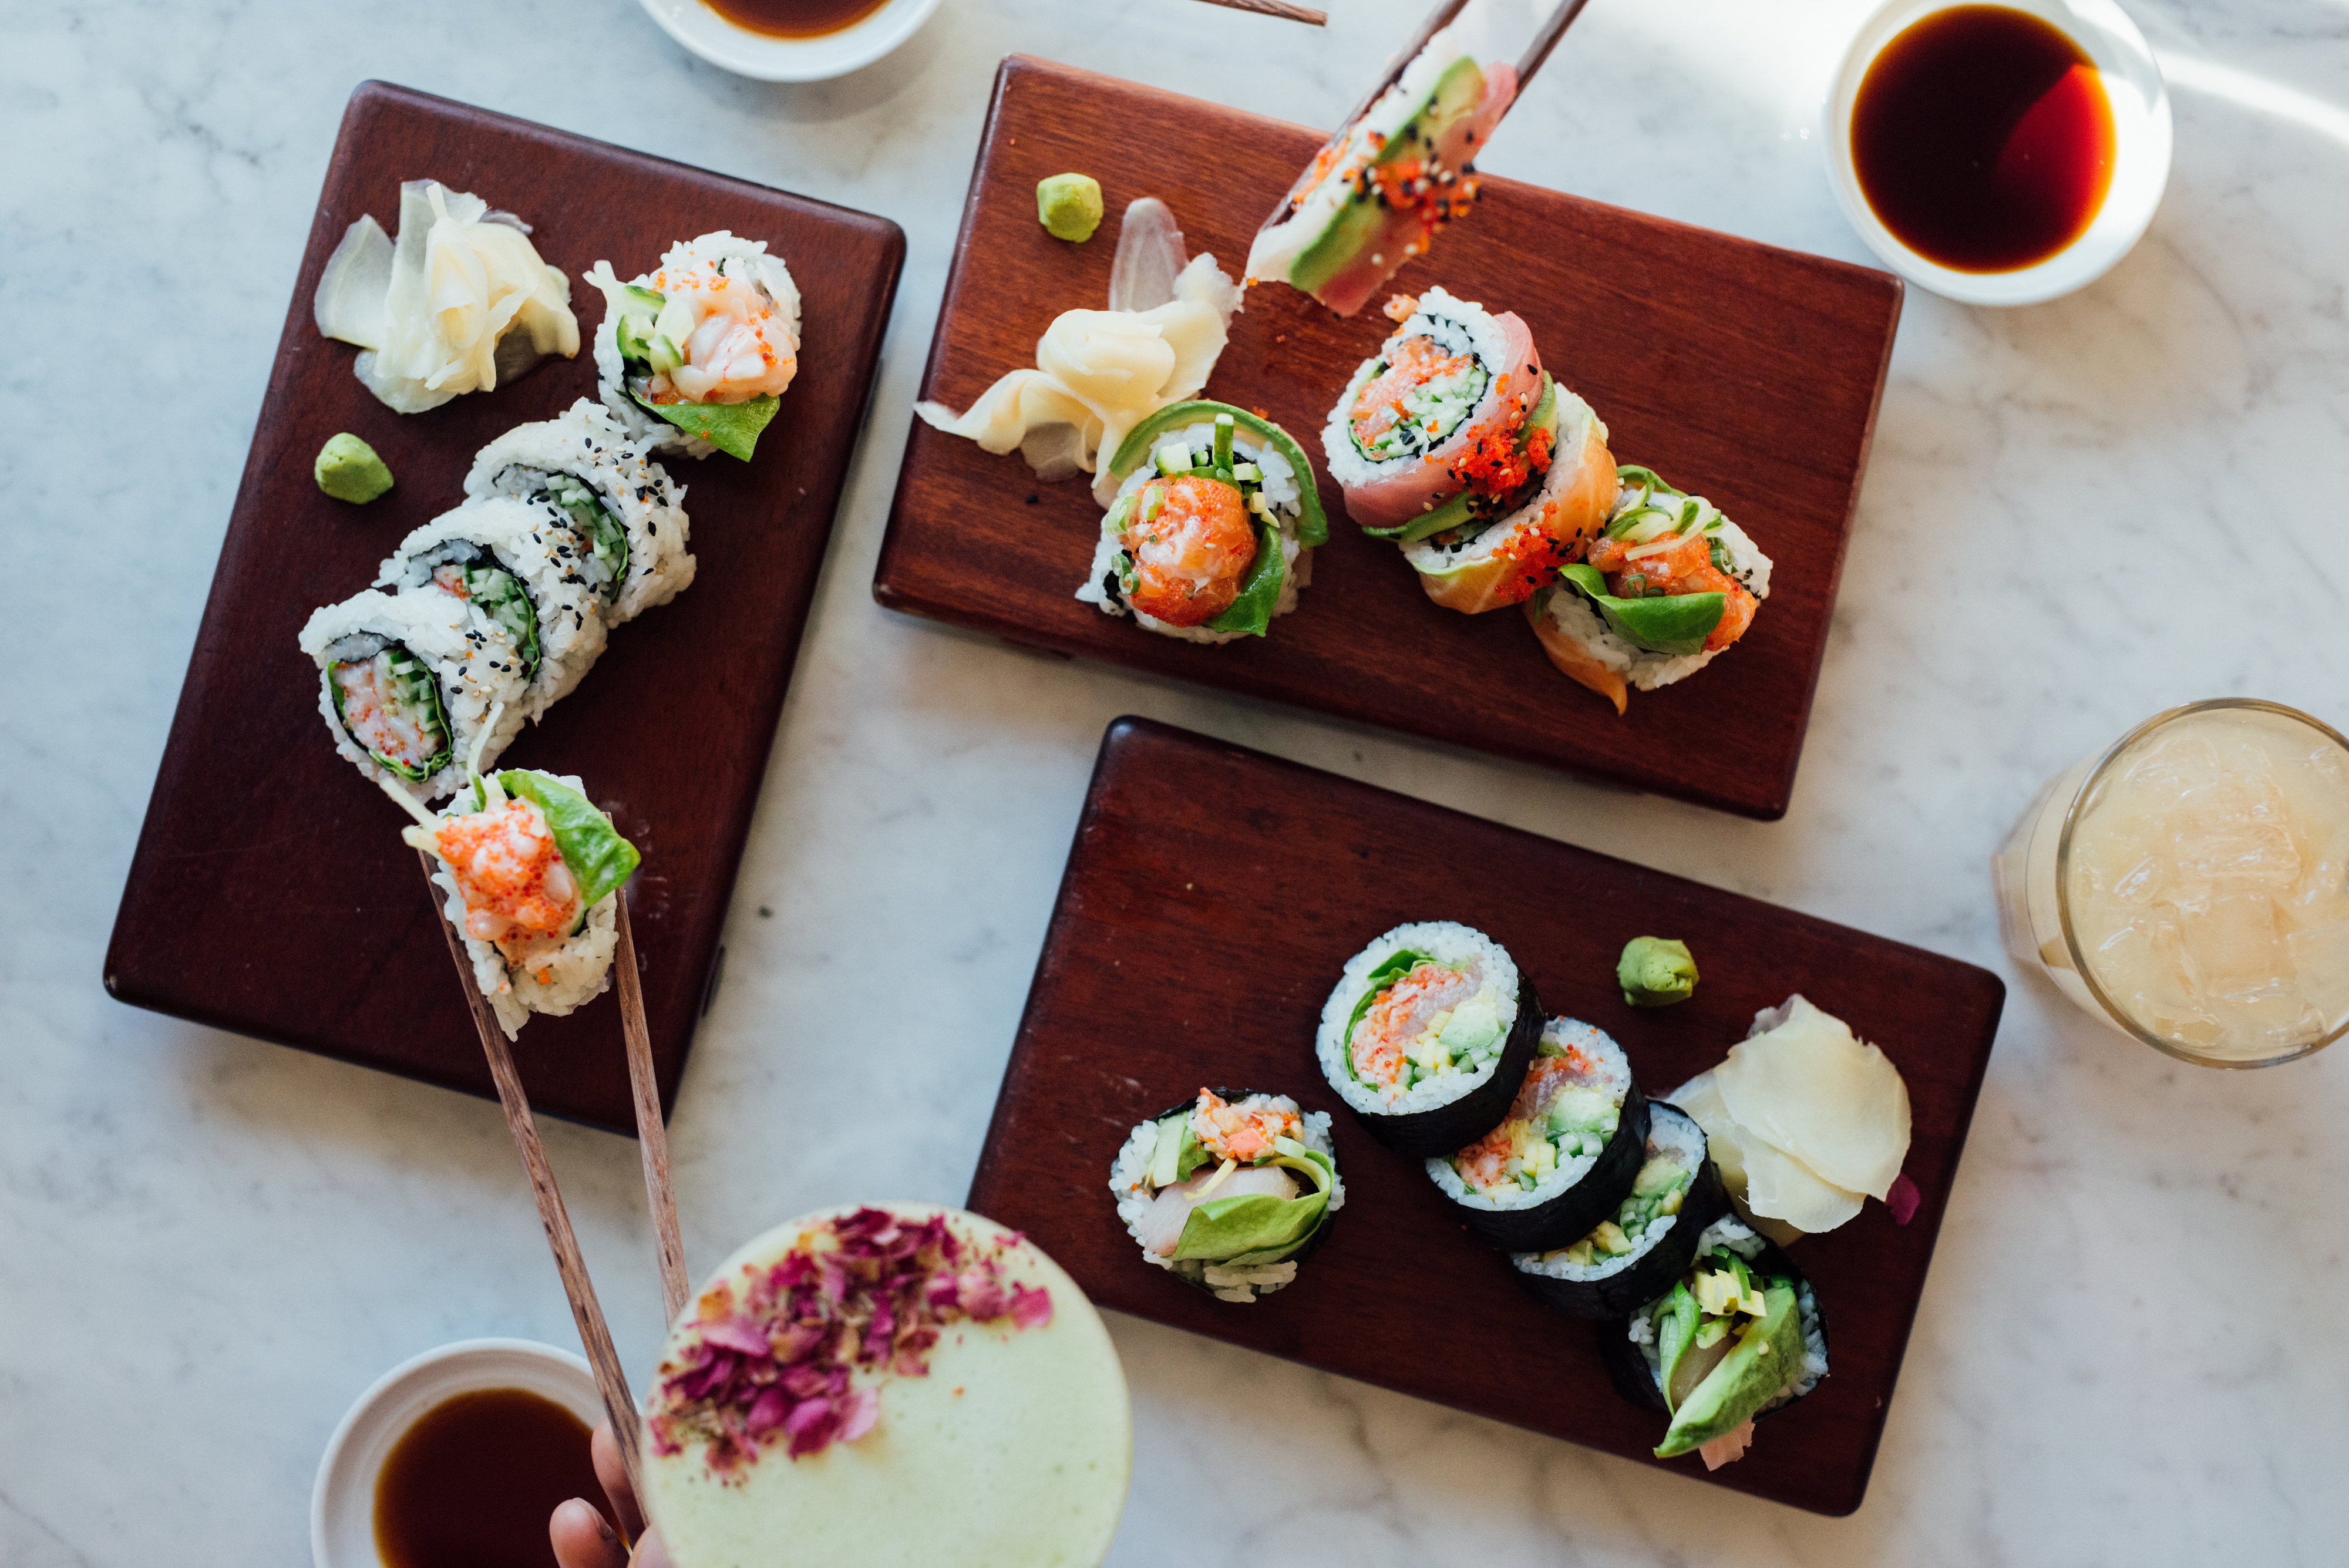 Le P Tit Tri A New Sushi Take Out From Tri Express Has Opened Tastet